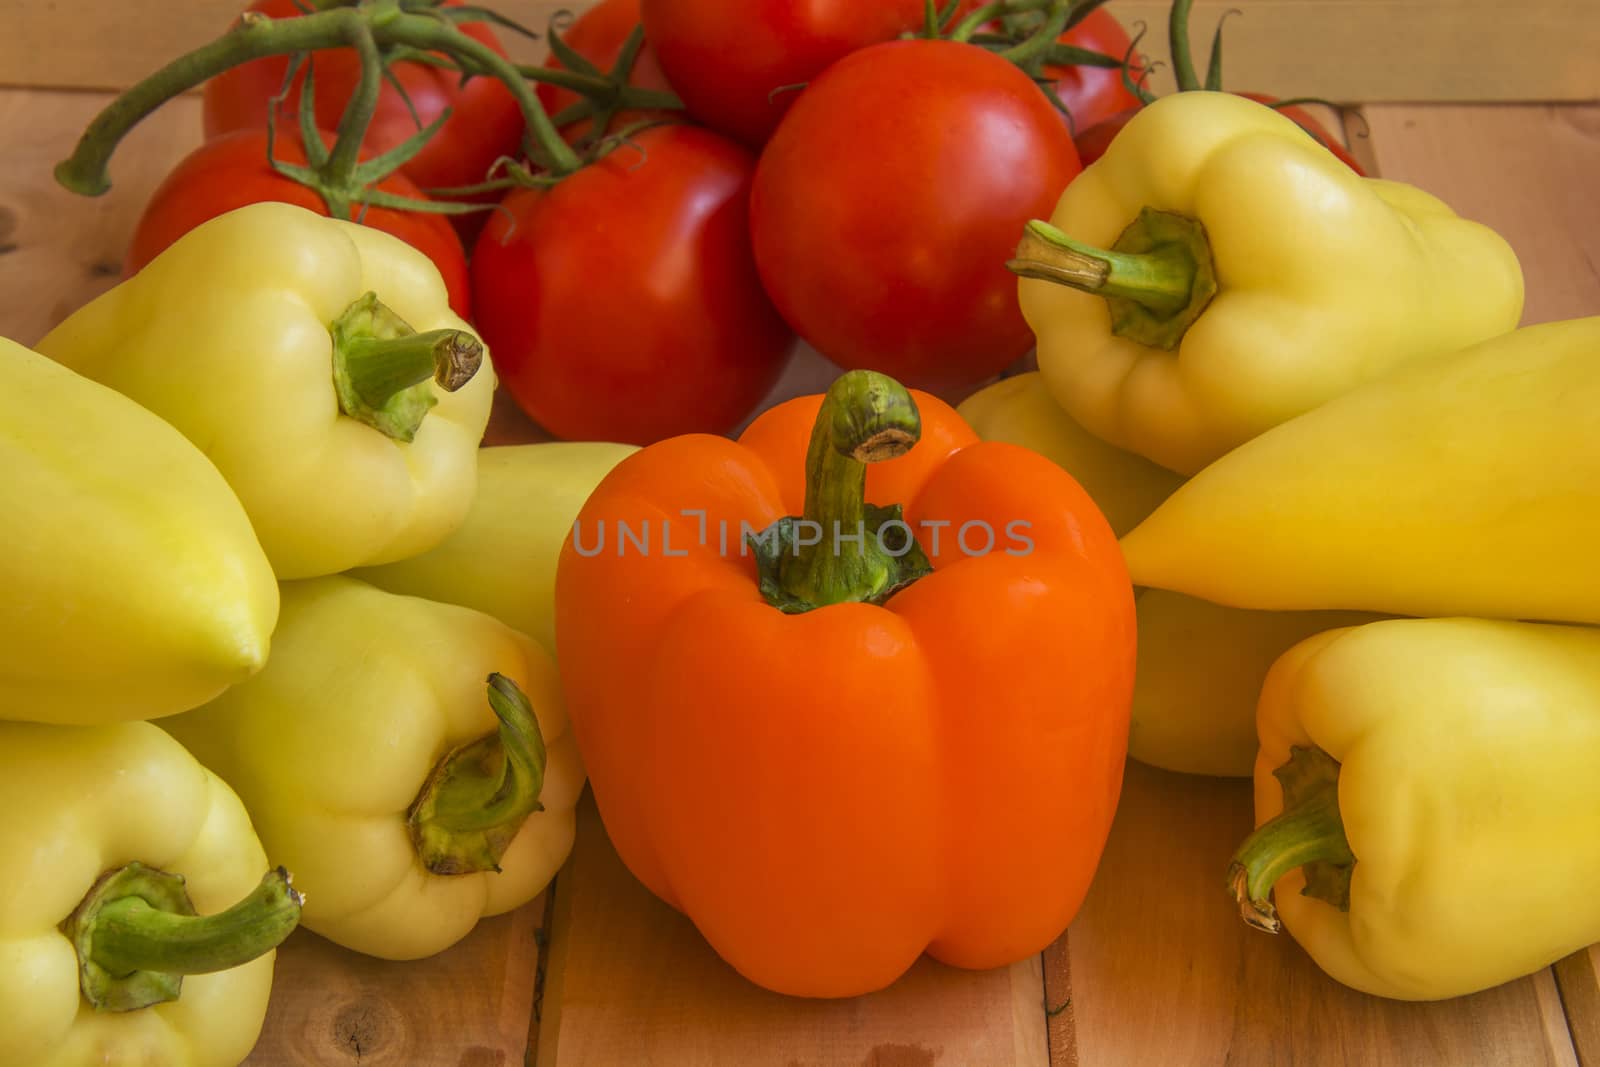 Orange and green peppers with tomatoes branch on a wooden surfac by Grommik